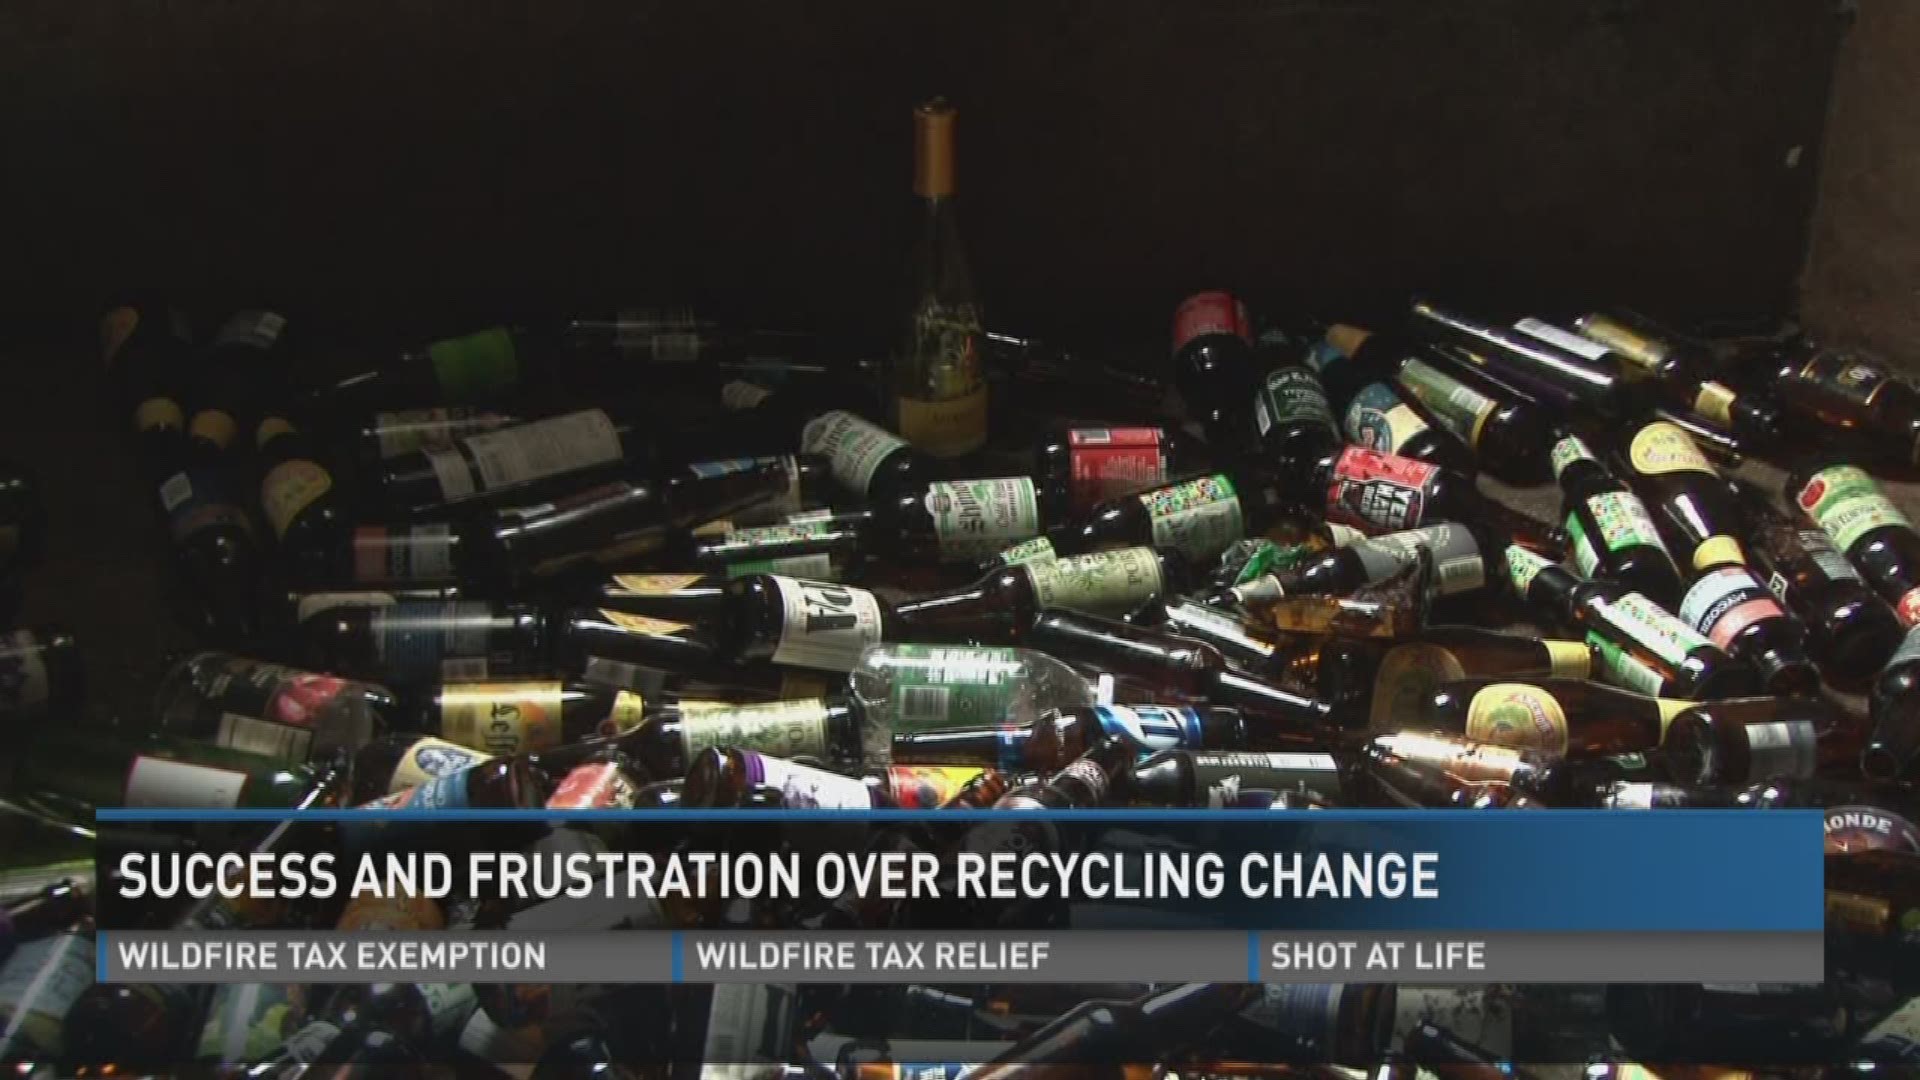 Feb. 22, 2017: Knoxville got rid of curb-side glass recycling to reduce time and waste. While the convenience is gone, the amount of glass being recycled is shattering expectations.